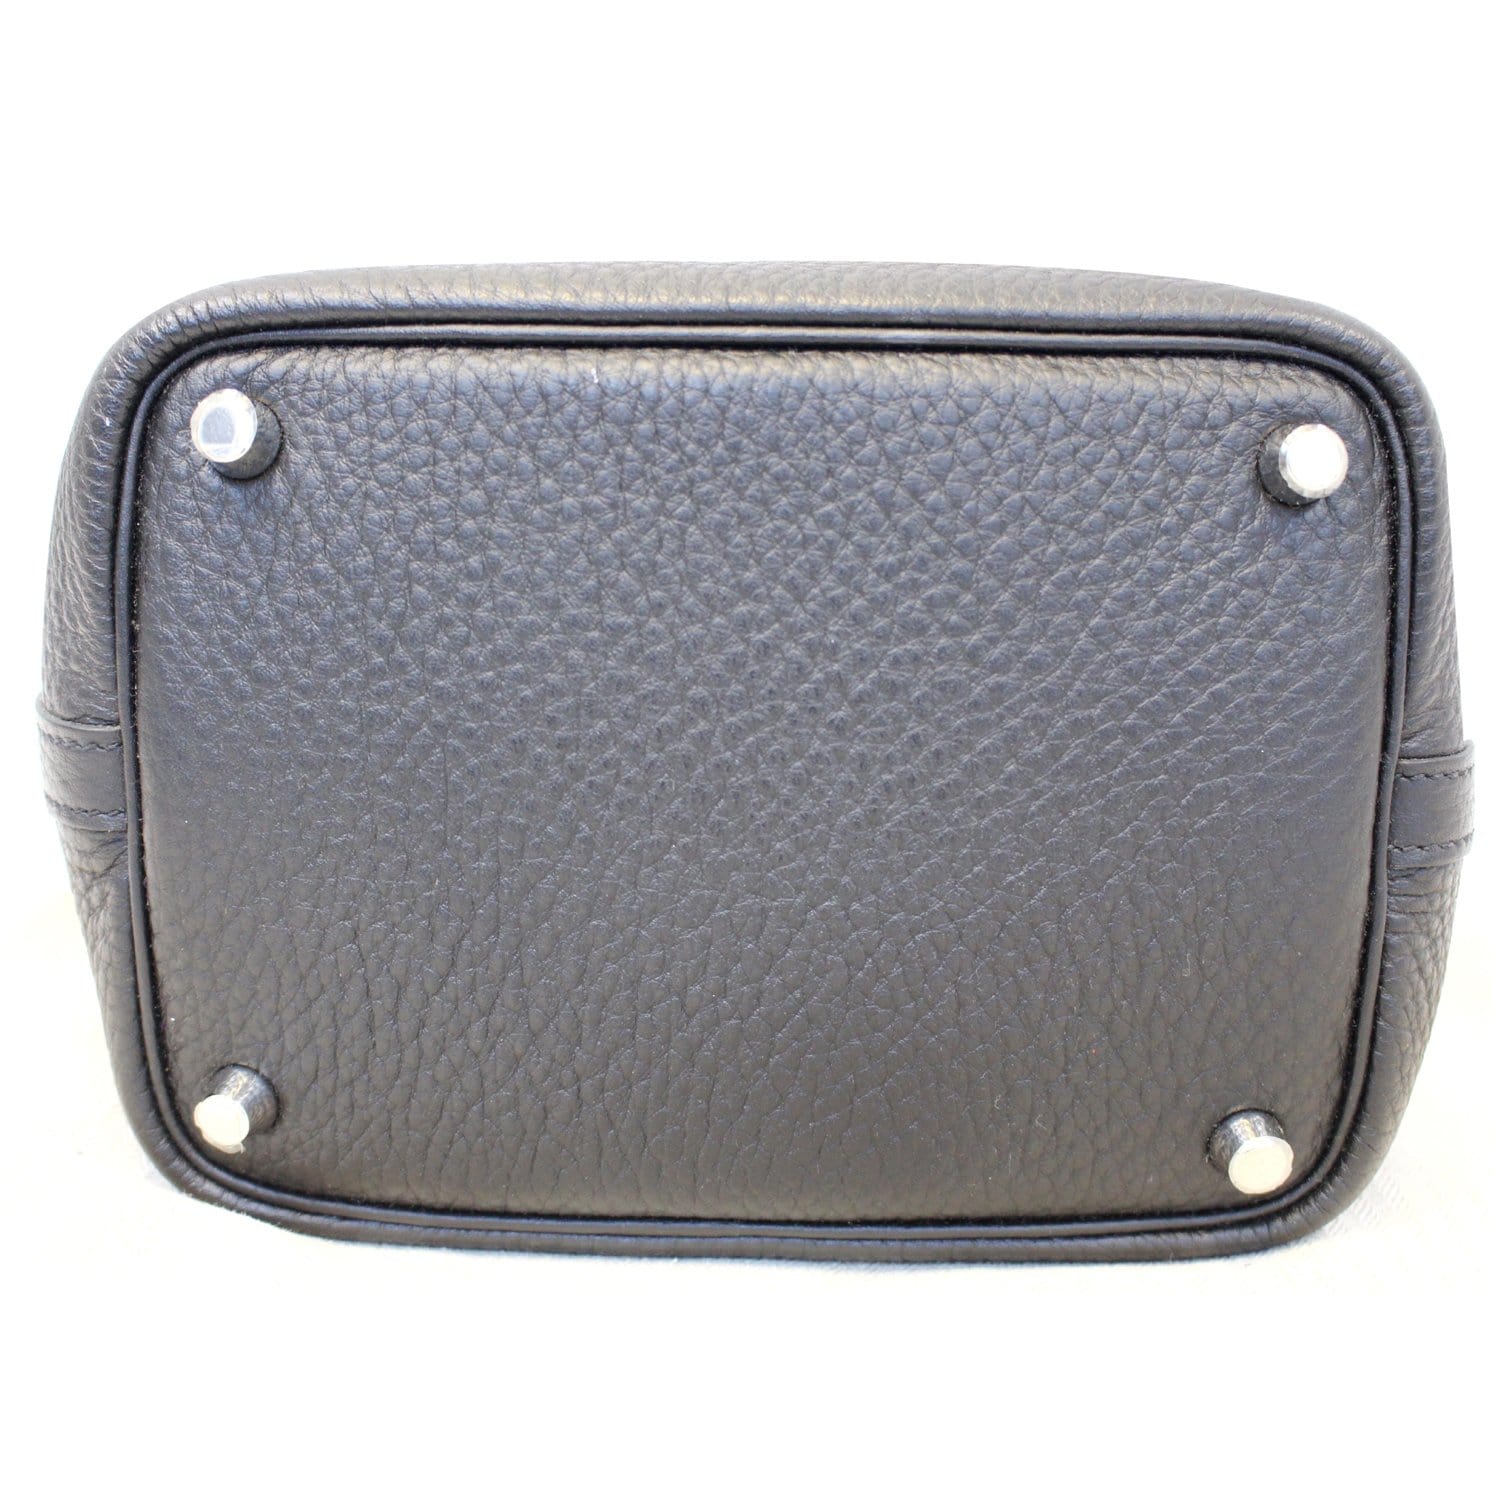 HERMES Taurillon Clemence Picotin Lock 18 PM Blue Jean 720331